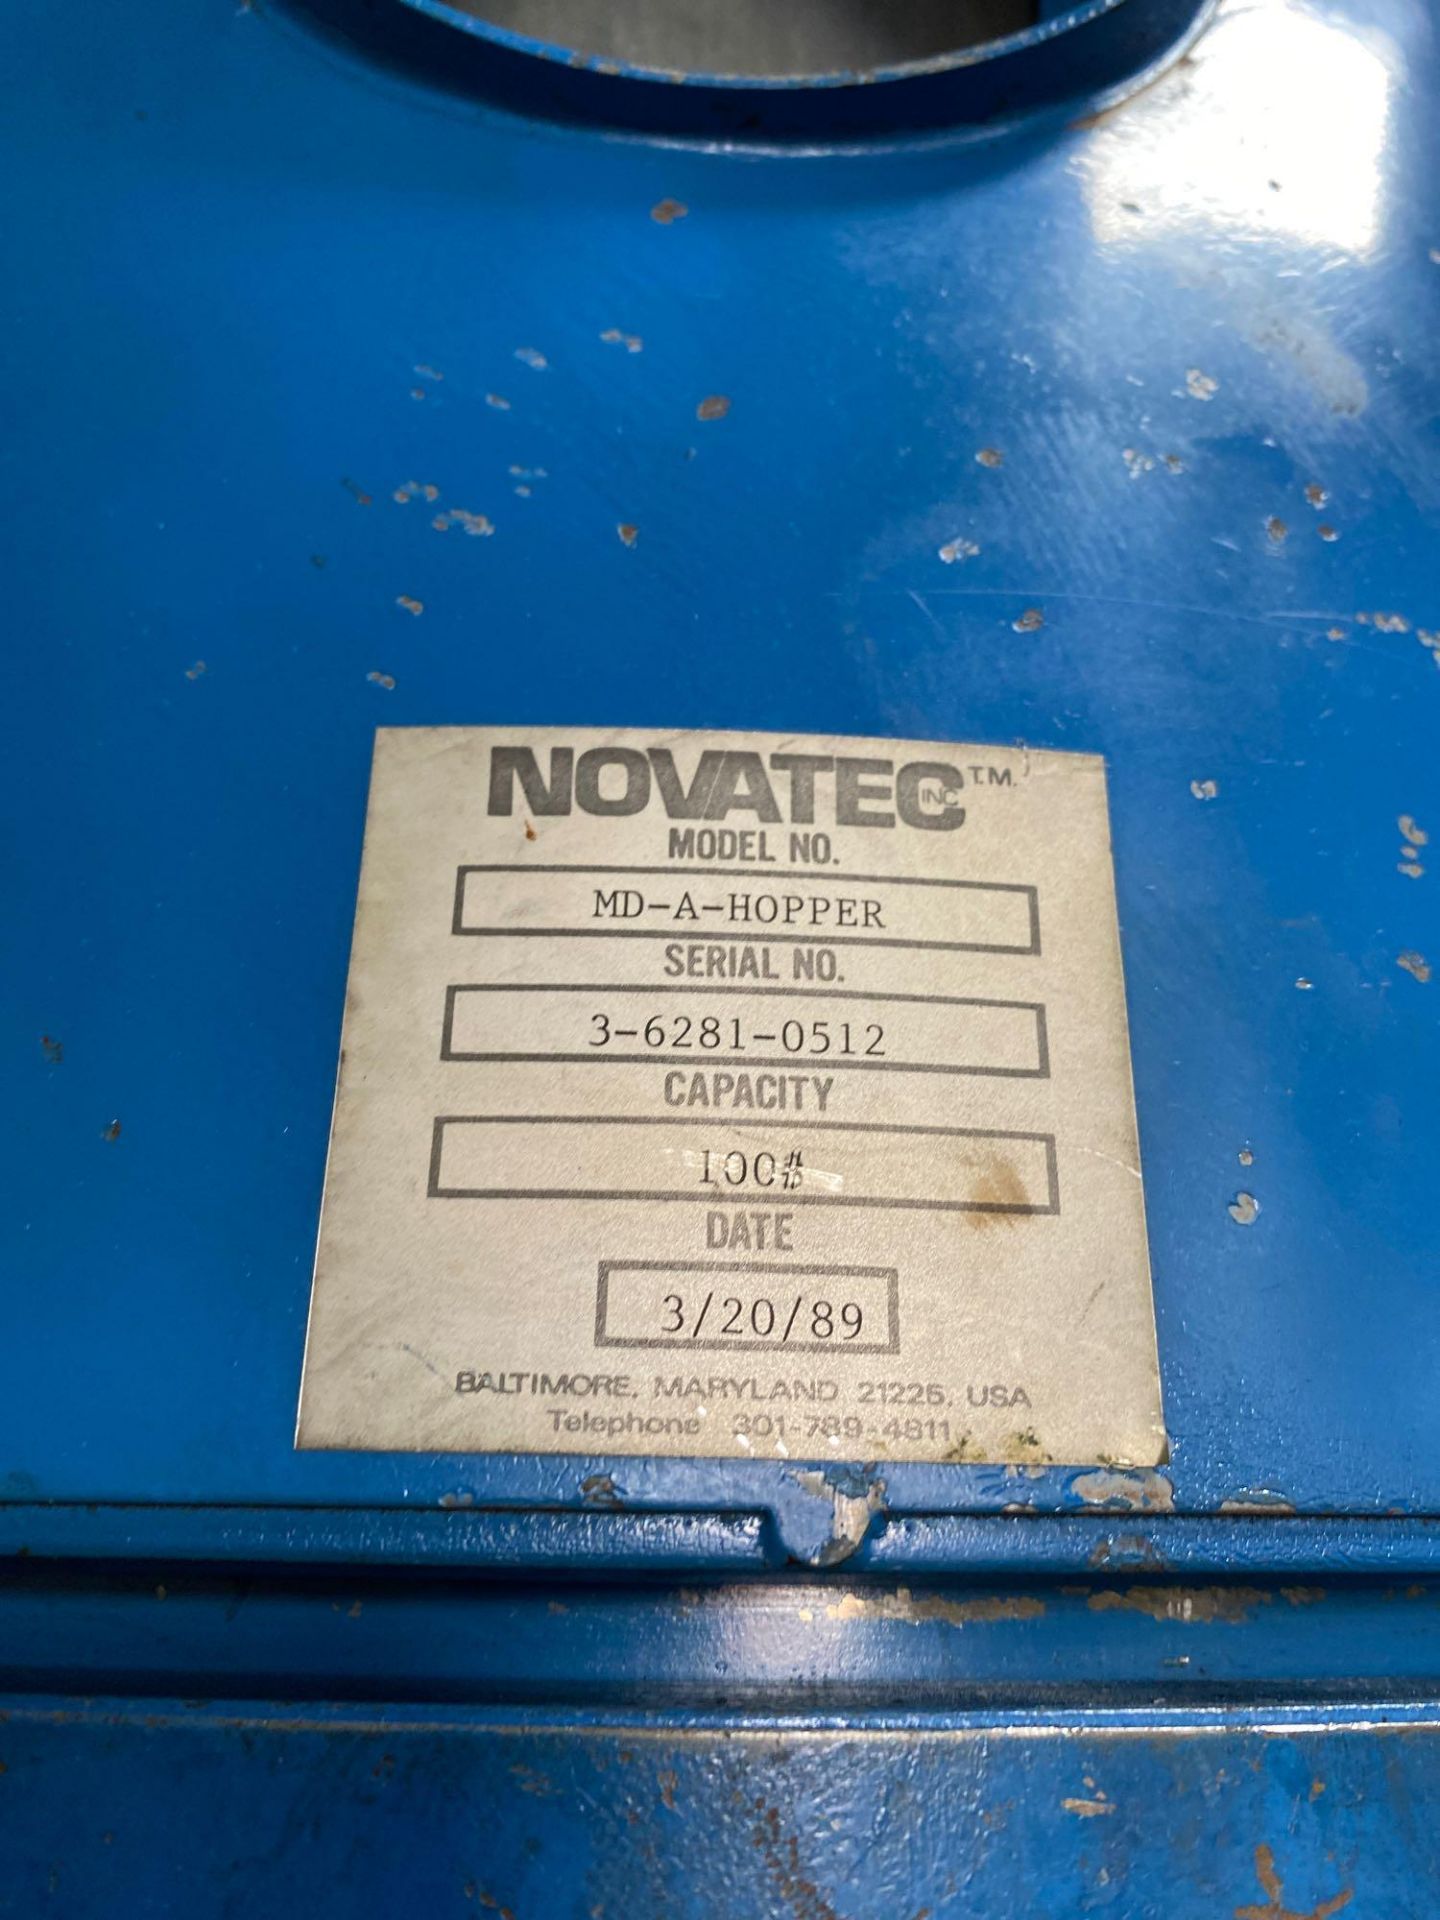 Novatec MD-A-Hopper 100# Cap., s/n 3-6281-0512, New 1989 and dryer - Image 2 of 5